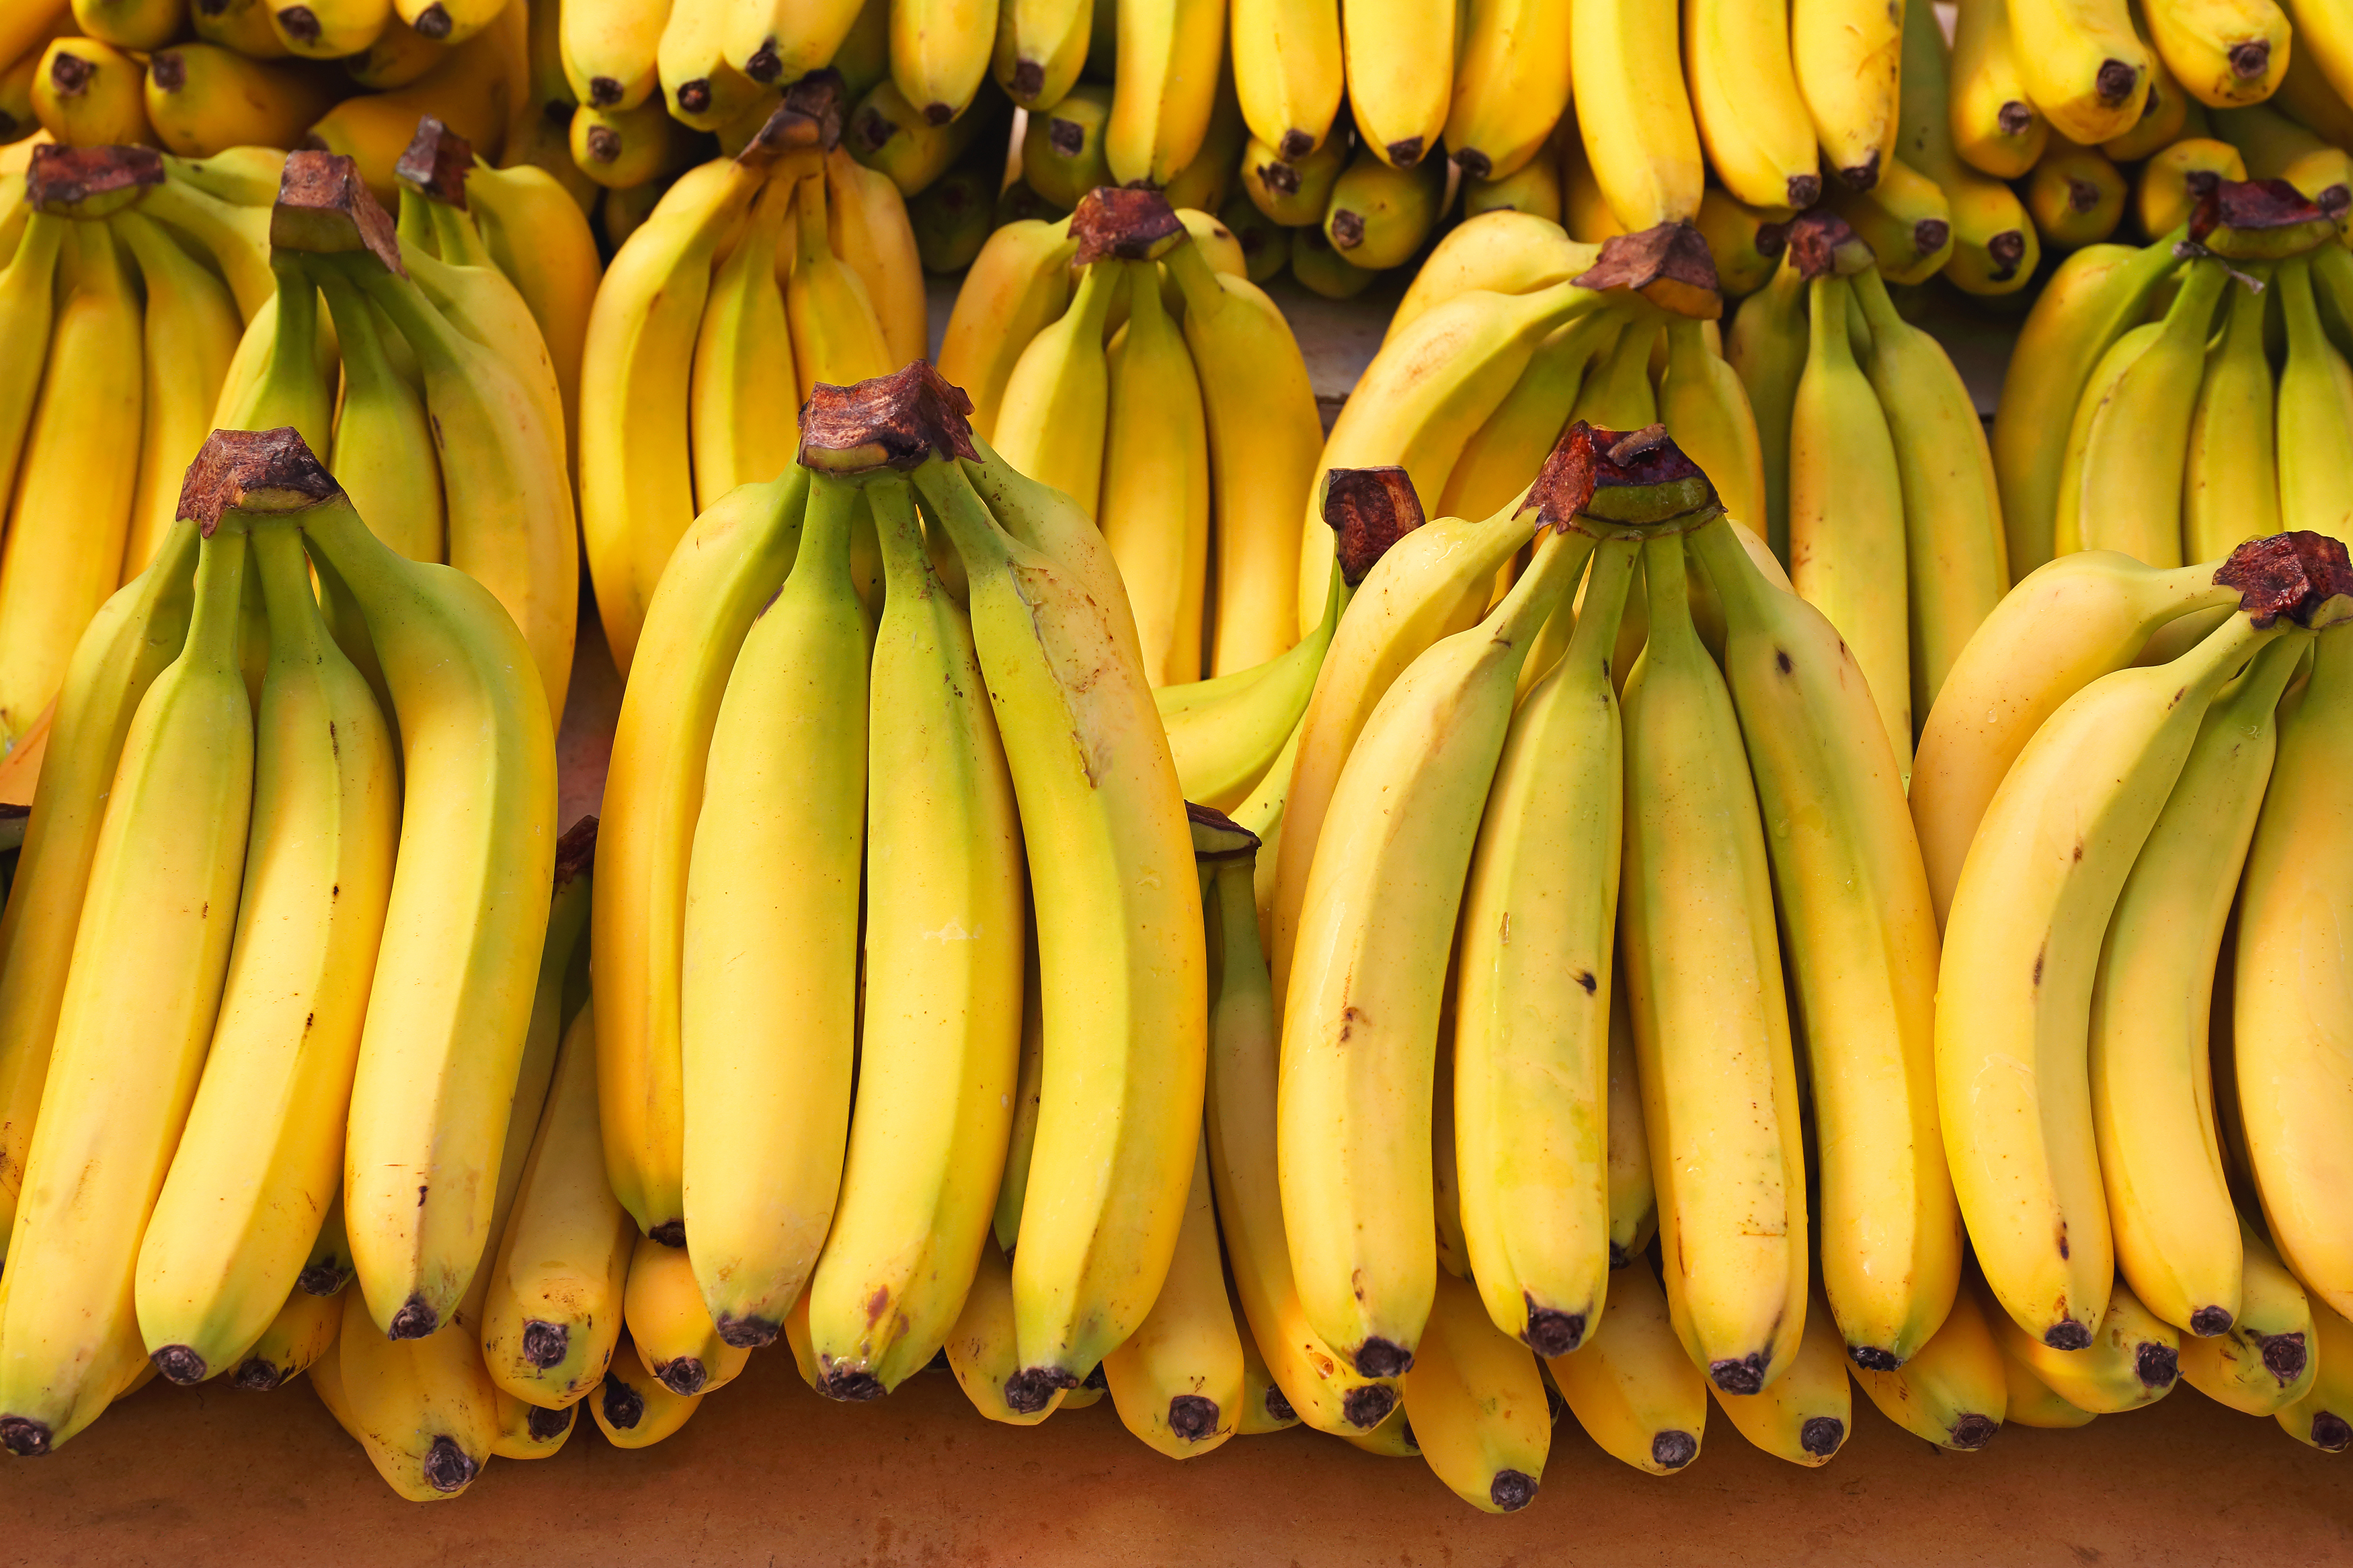 Is Eating a Lot of Bananas Healthy? | LIVESTRONG.COM